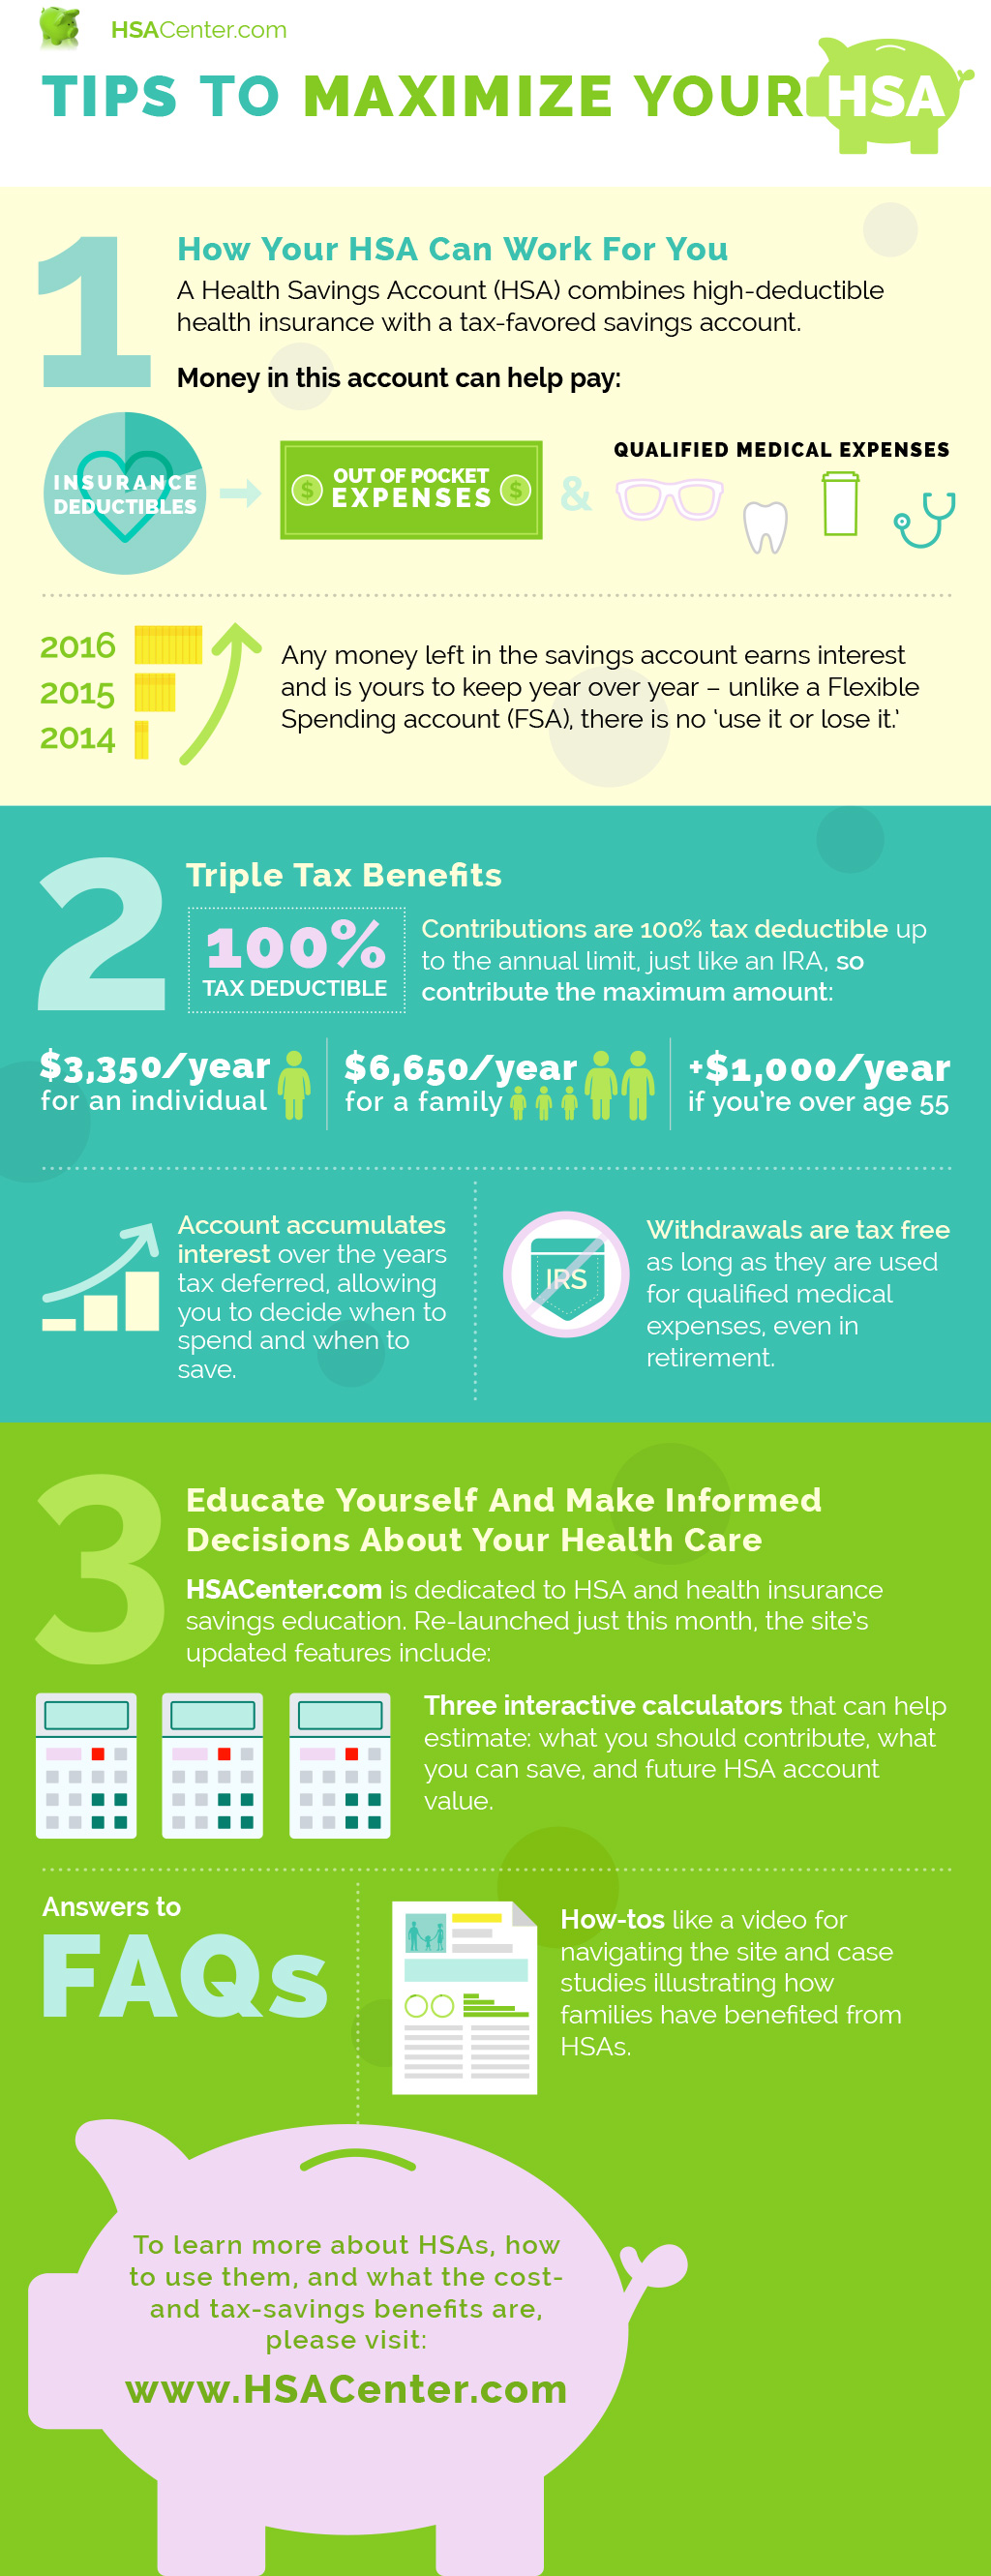 Tips To Maximize Your Health Savings Account